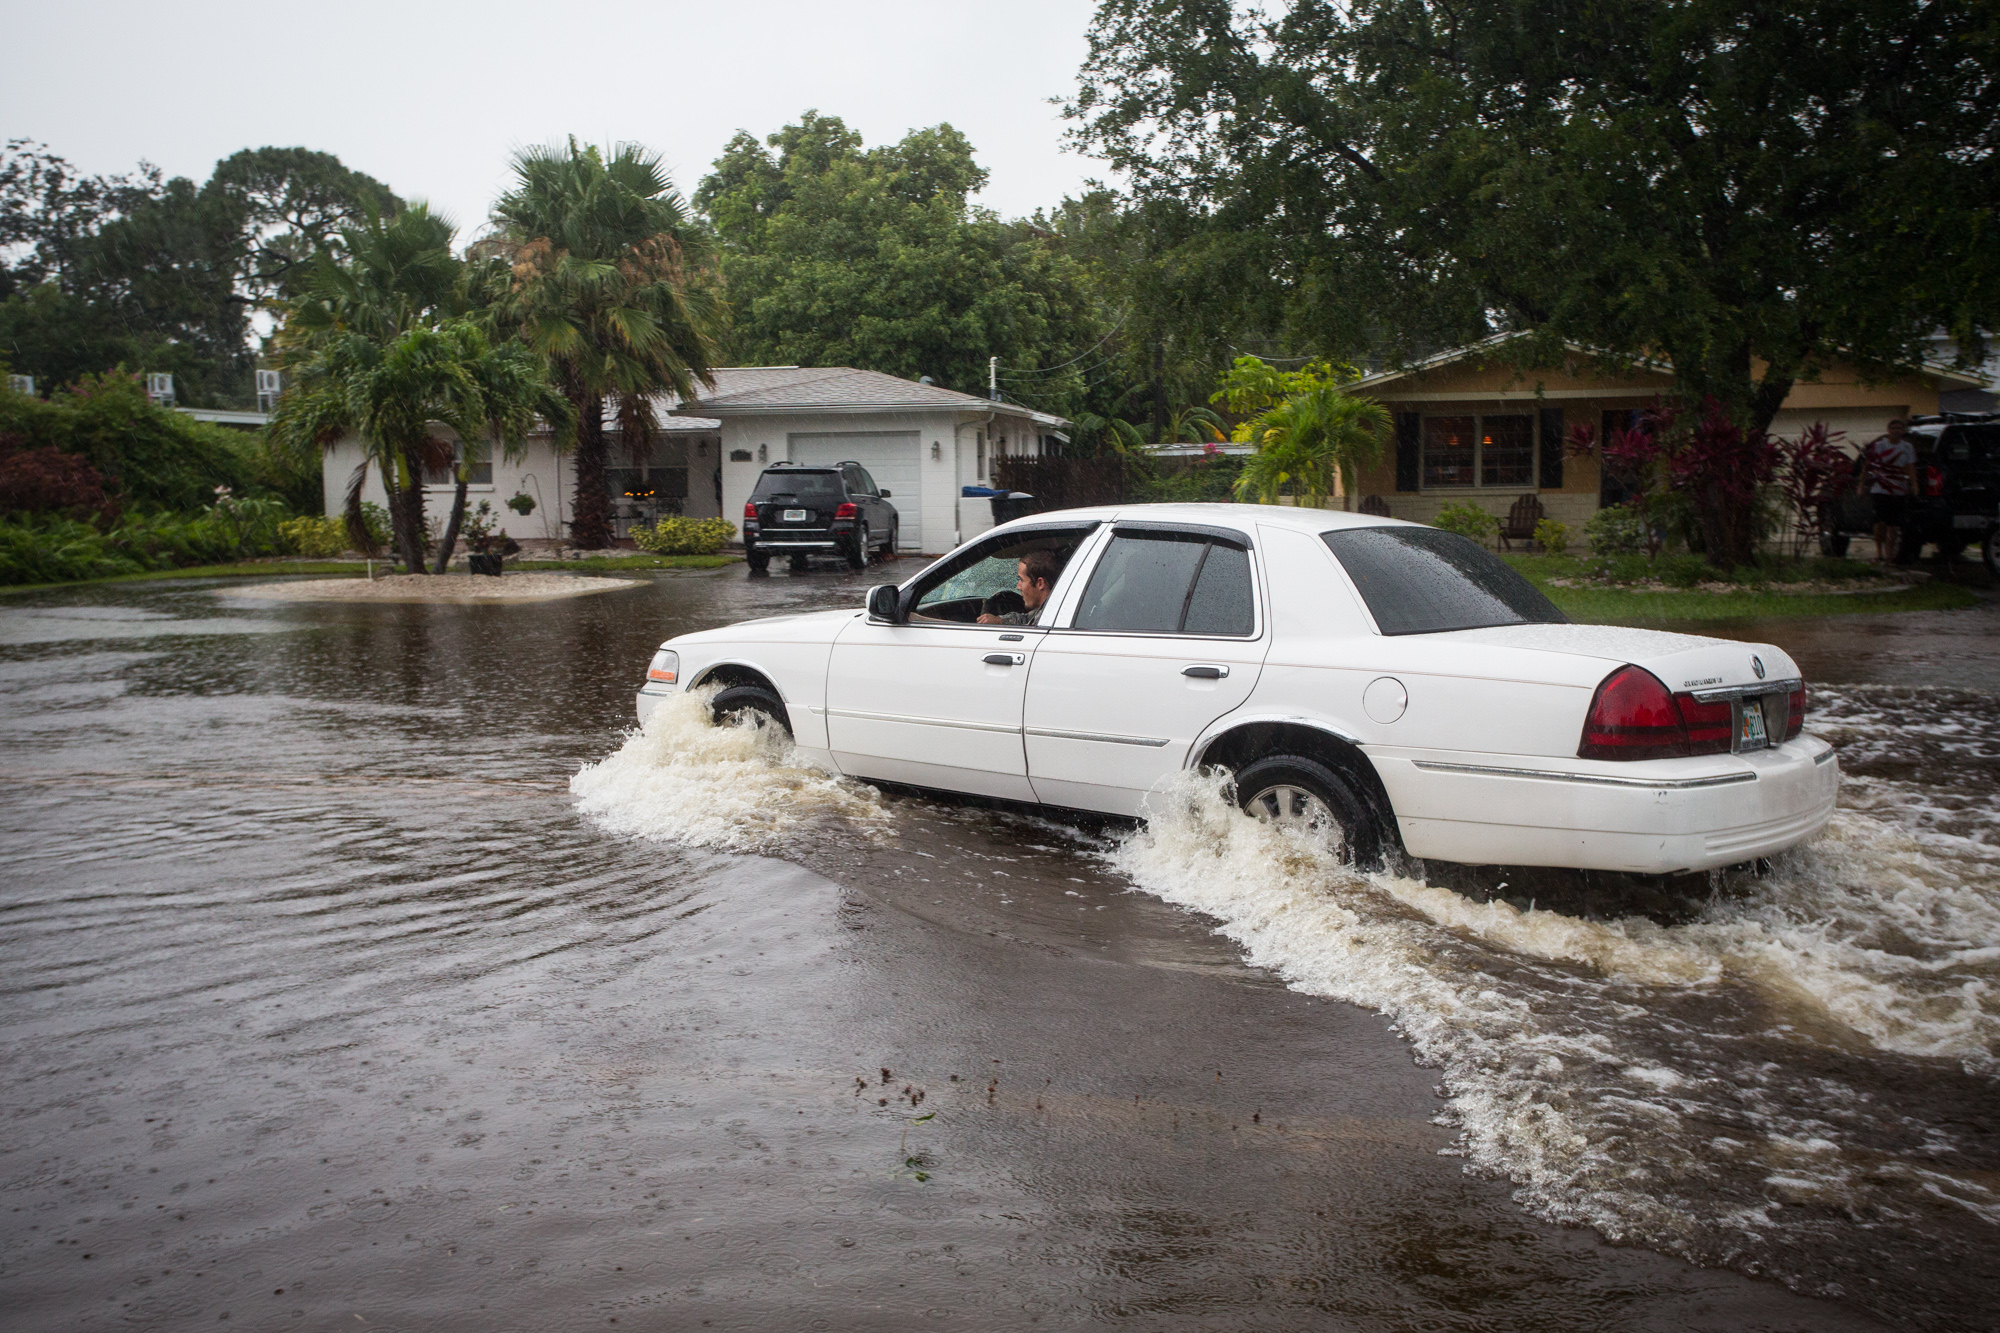 A motorist drives down a flooded street in St. Petersburg, Fla., after Tropical Storm Colin dumped heavy rains over the Tampa Bay area on June 7, 2016.